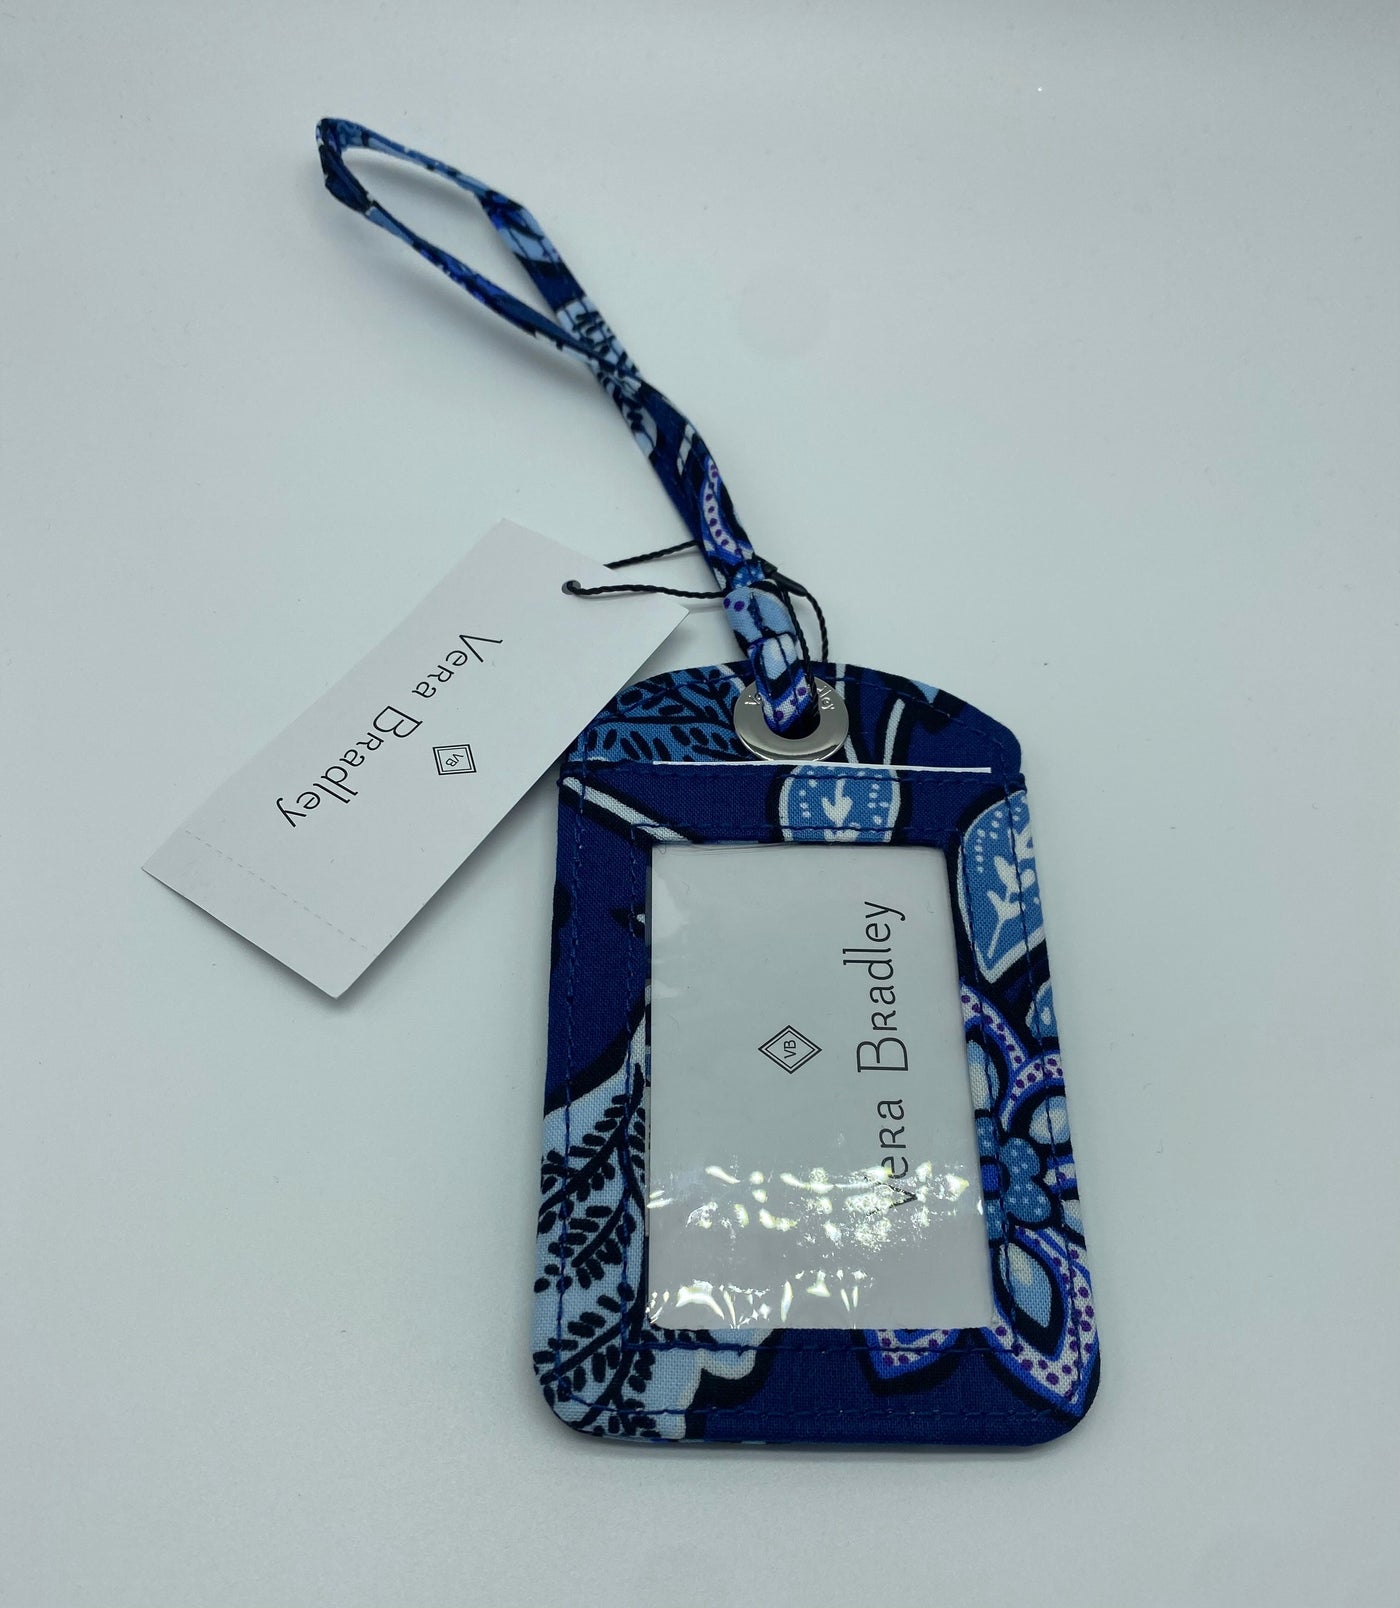 Vera Bradley Factory Style Luggage Tag Cotton Tropics Tapestry New with Tag